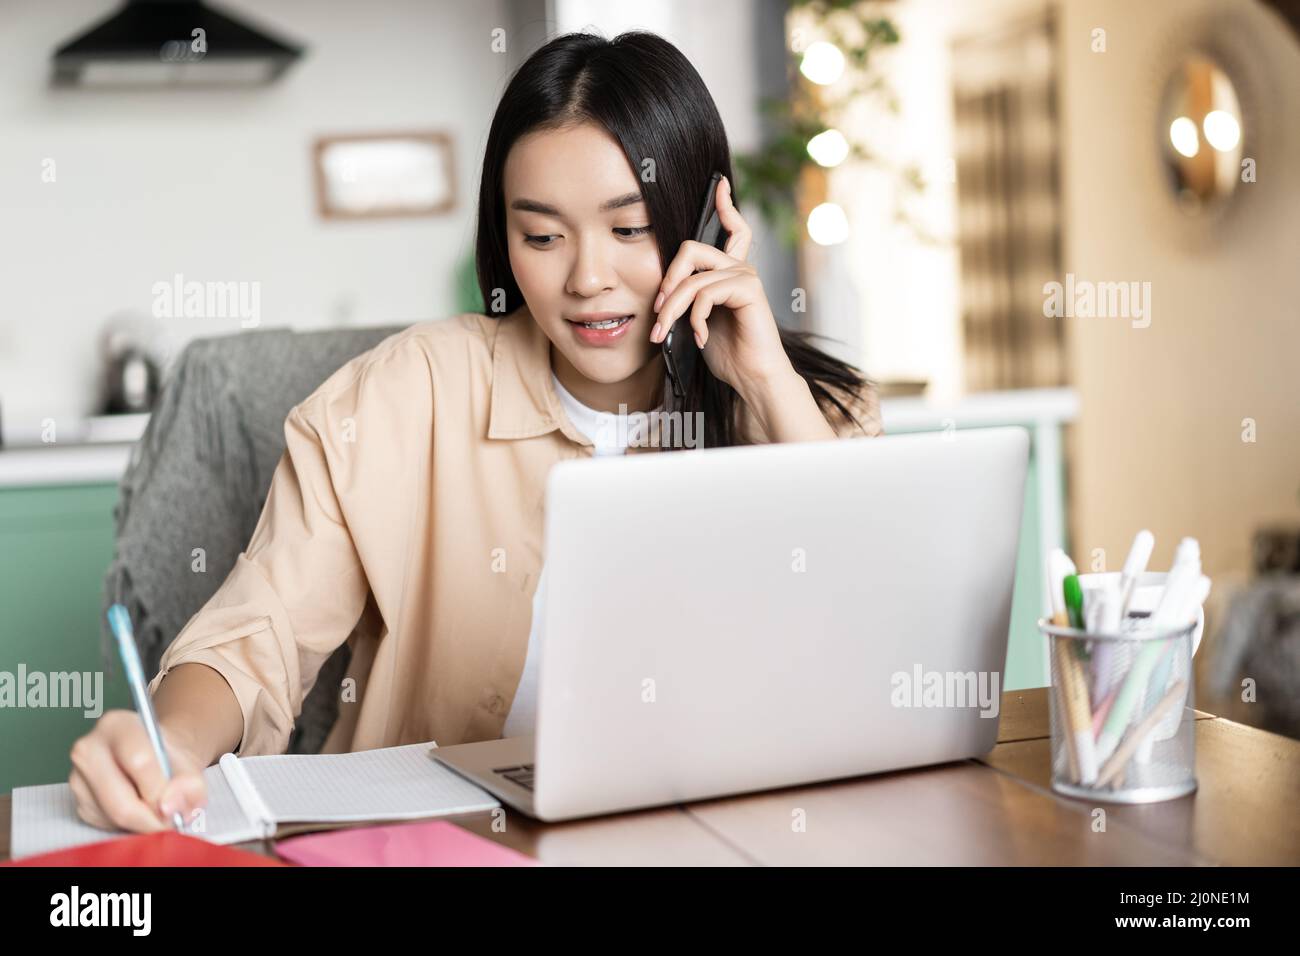 Asian woman working from home, answer phone call and writing down in notebook. Girl entrepreneur busy on cellphone, sitting near Stock Photo